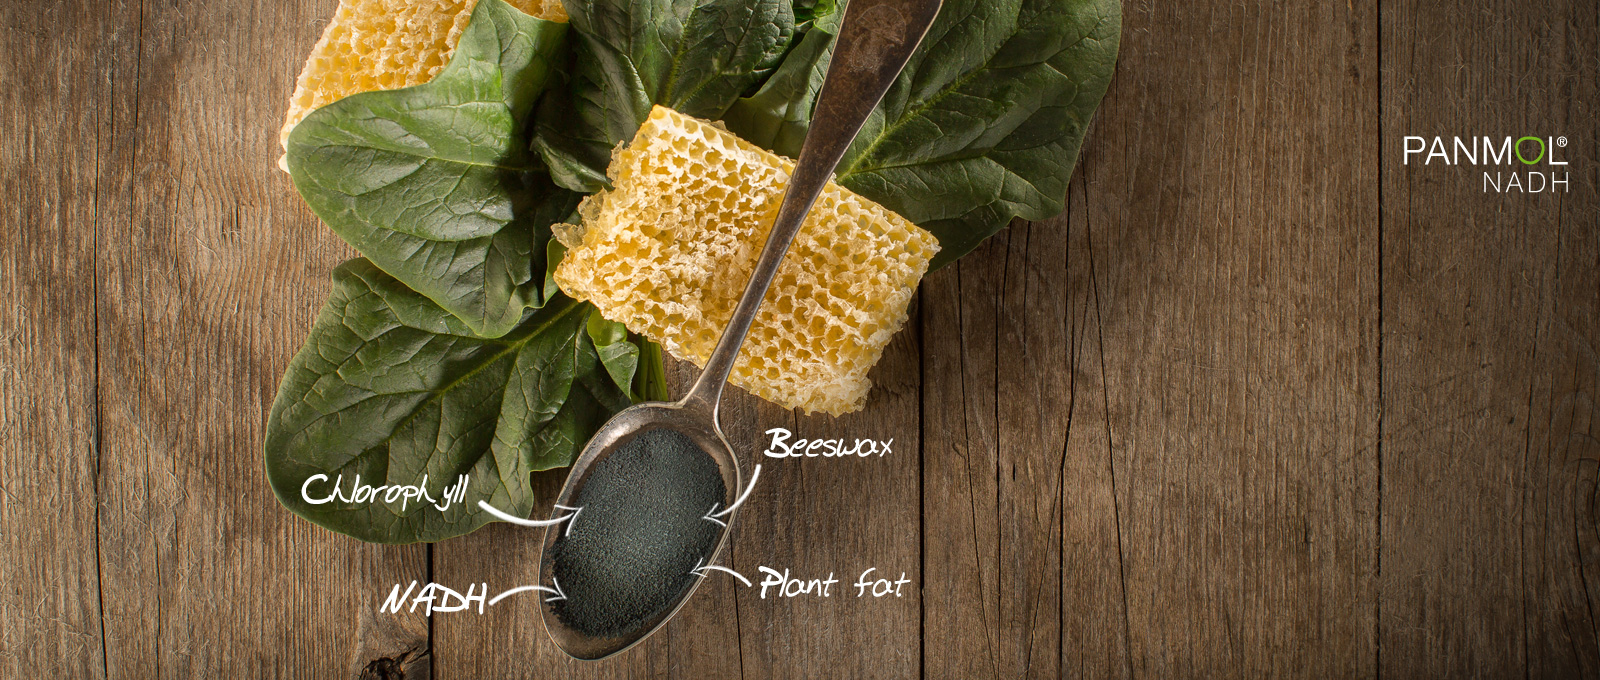 Panmol image with spinach, beeswax and spoon